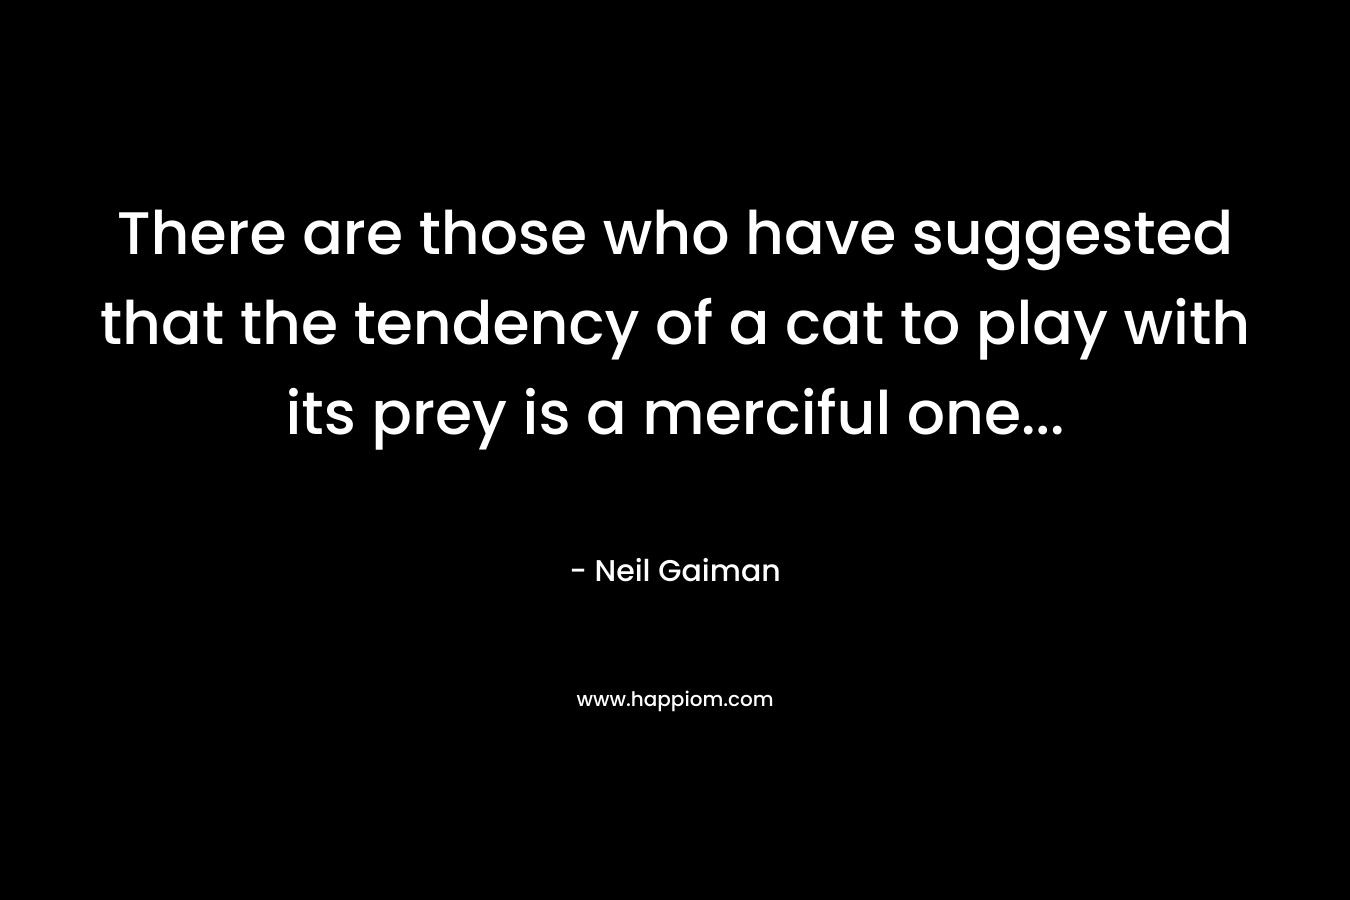 There are those who have suggested that the tendency of a cat to play with its prey is a merciful one… – Neil Gaiman